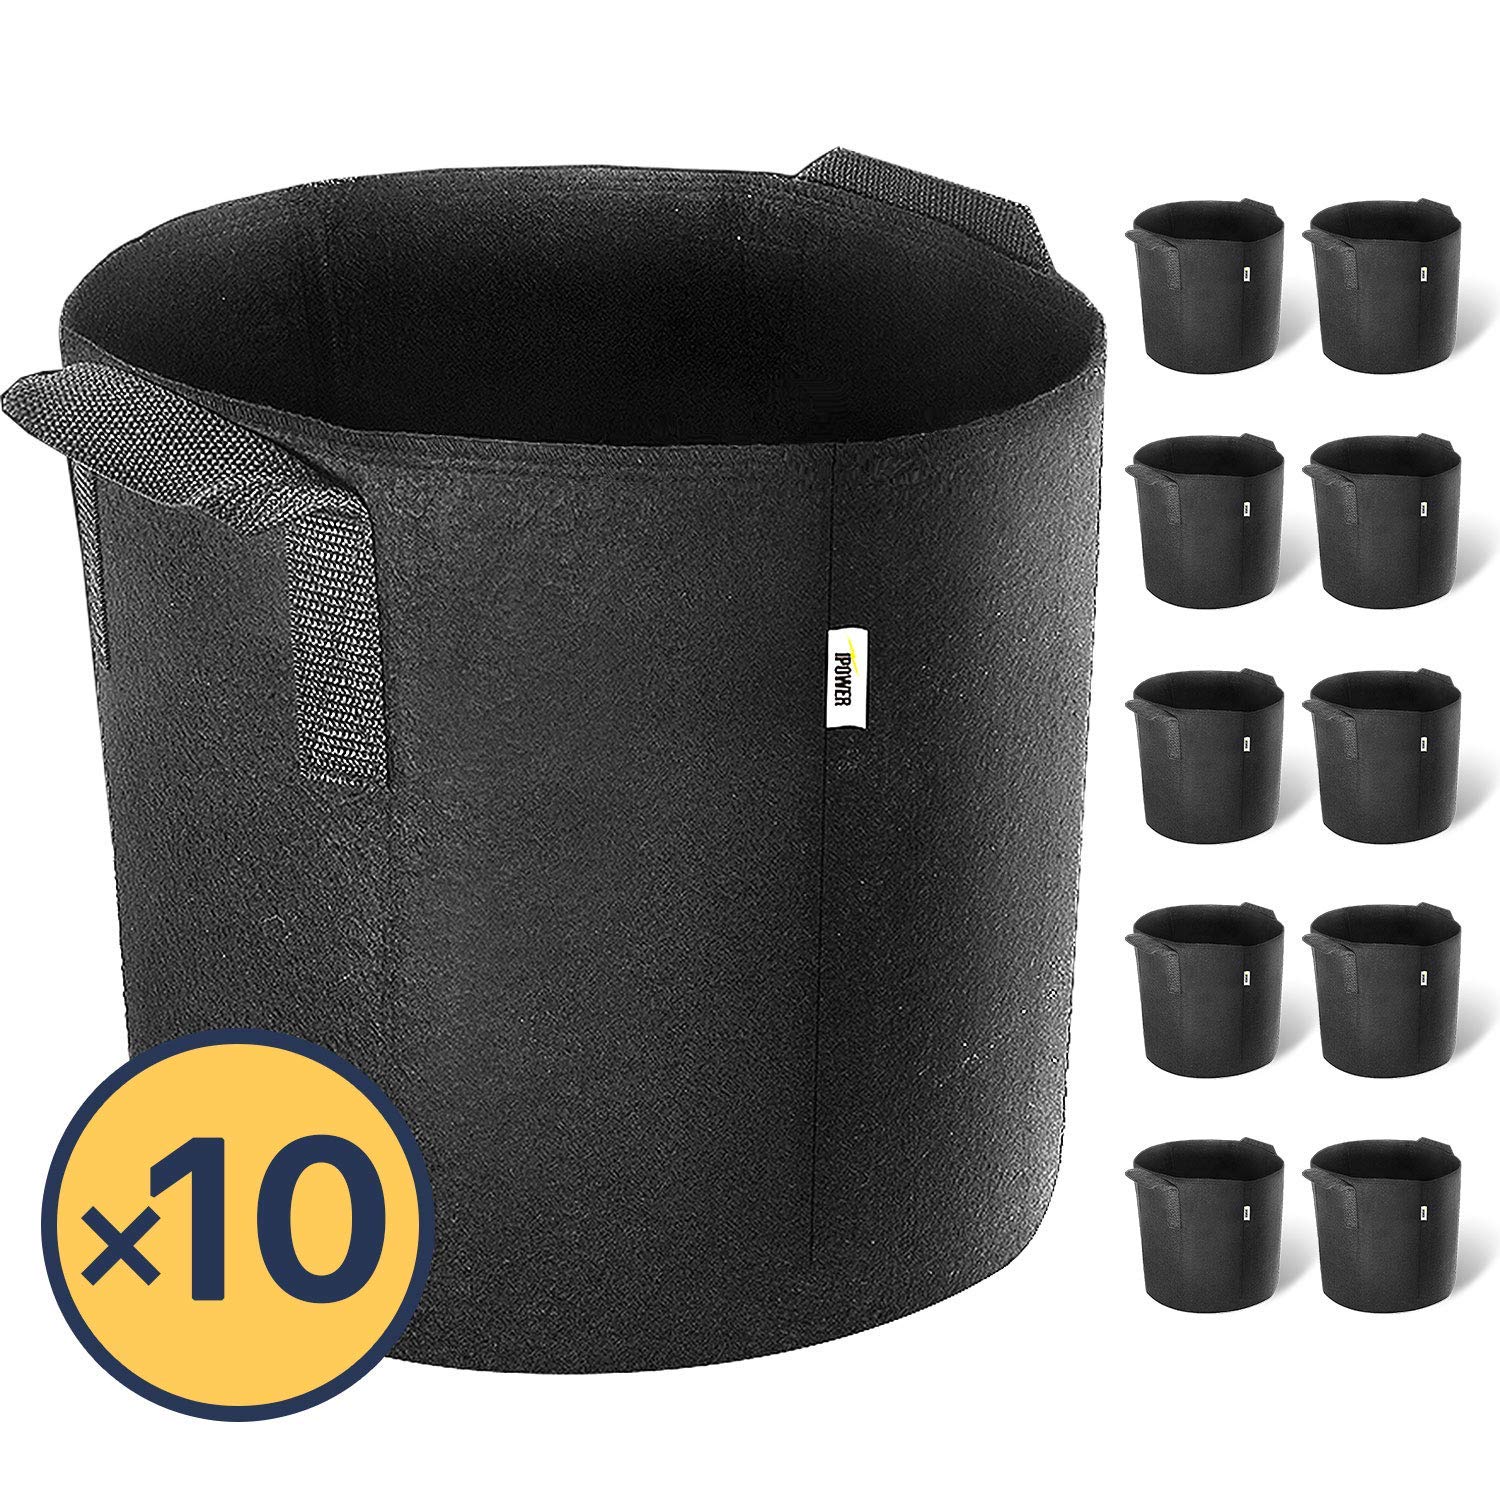 iPower 5 Pack 10 Gallon Square Grow Bags Thickened Fabric Pots with Handles and Stick Holders for Poles Black 